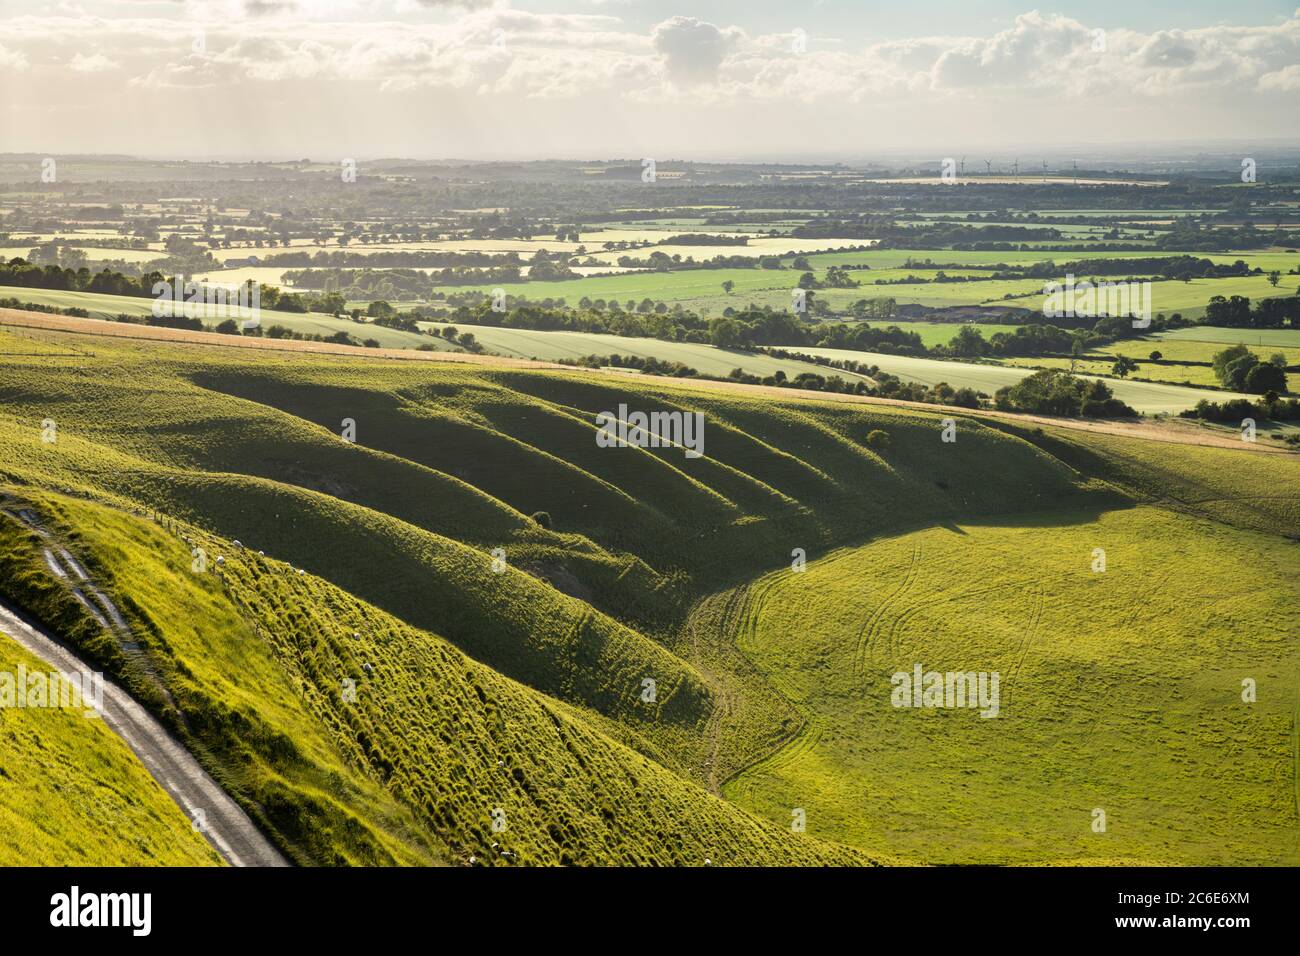 The Manger and Vale of White Horse viewed from White Horse Hill, Uffington, Oxfordshire, England, United Kingdom, Europe Stock Photo